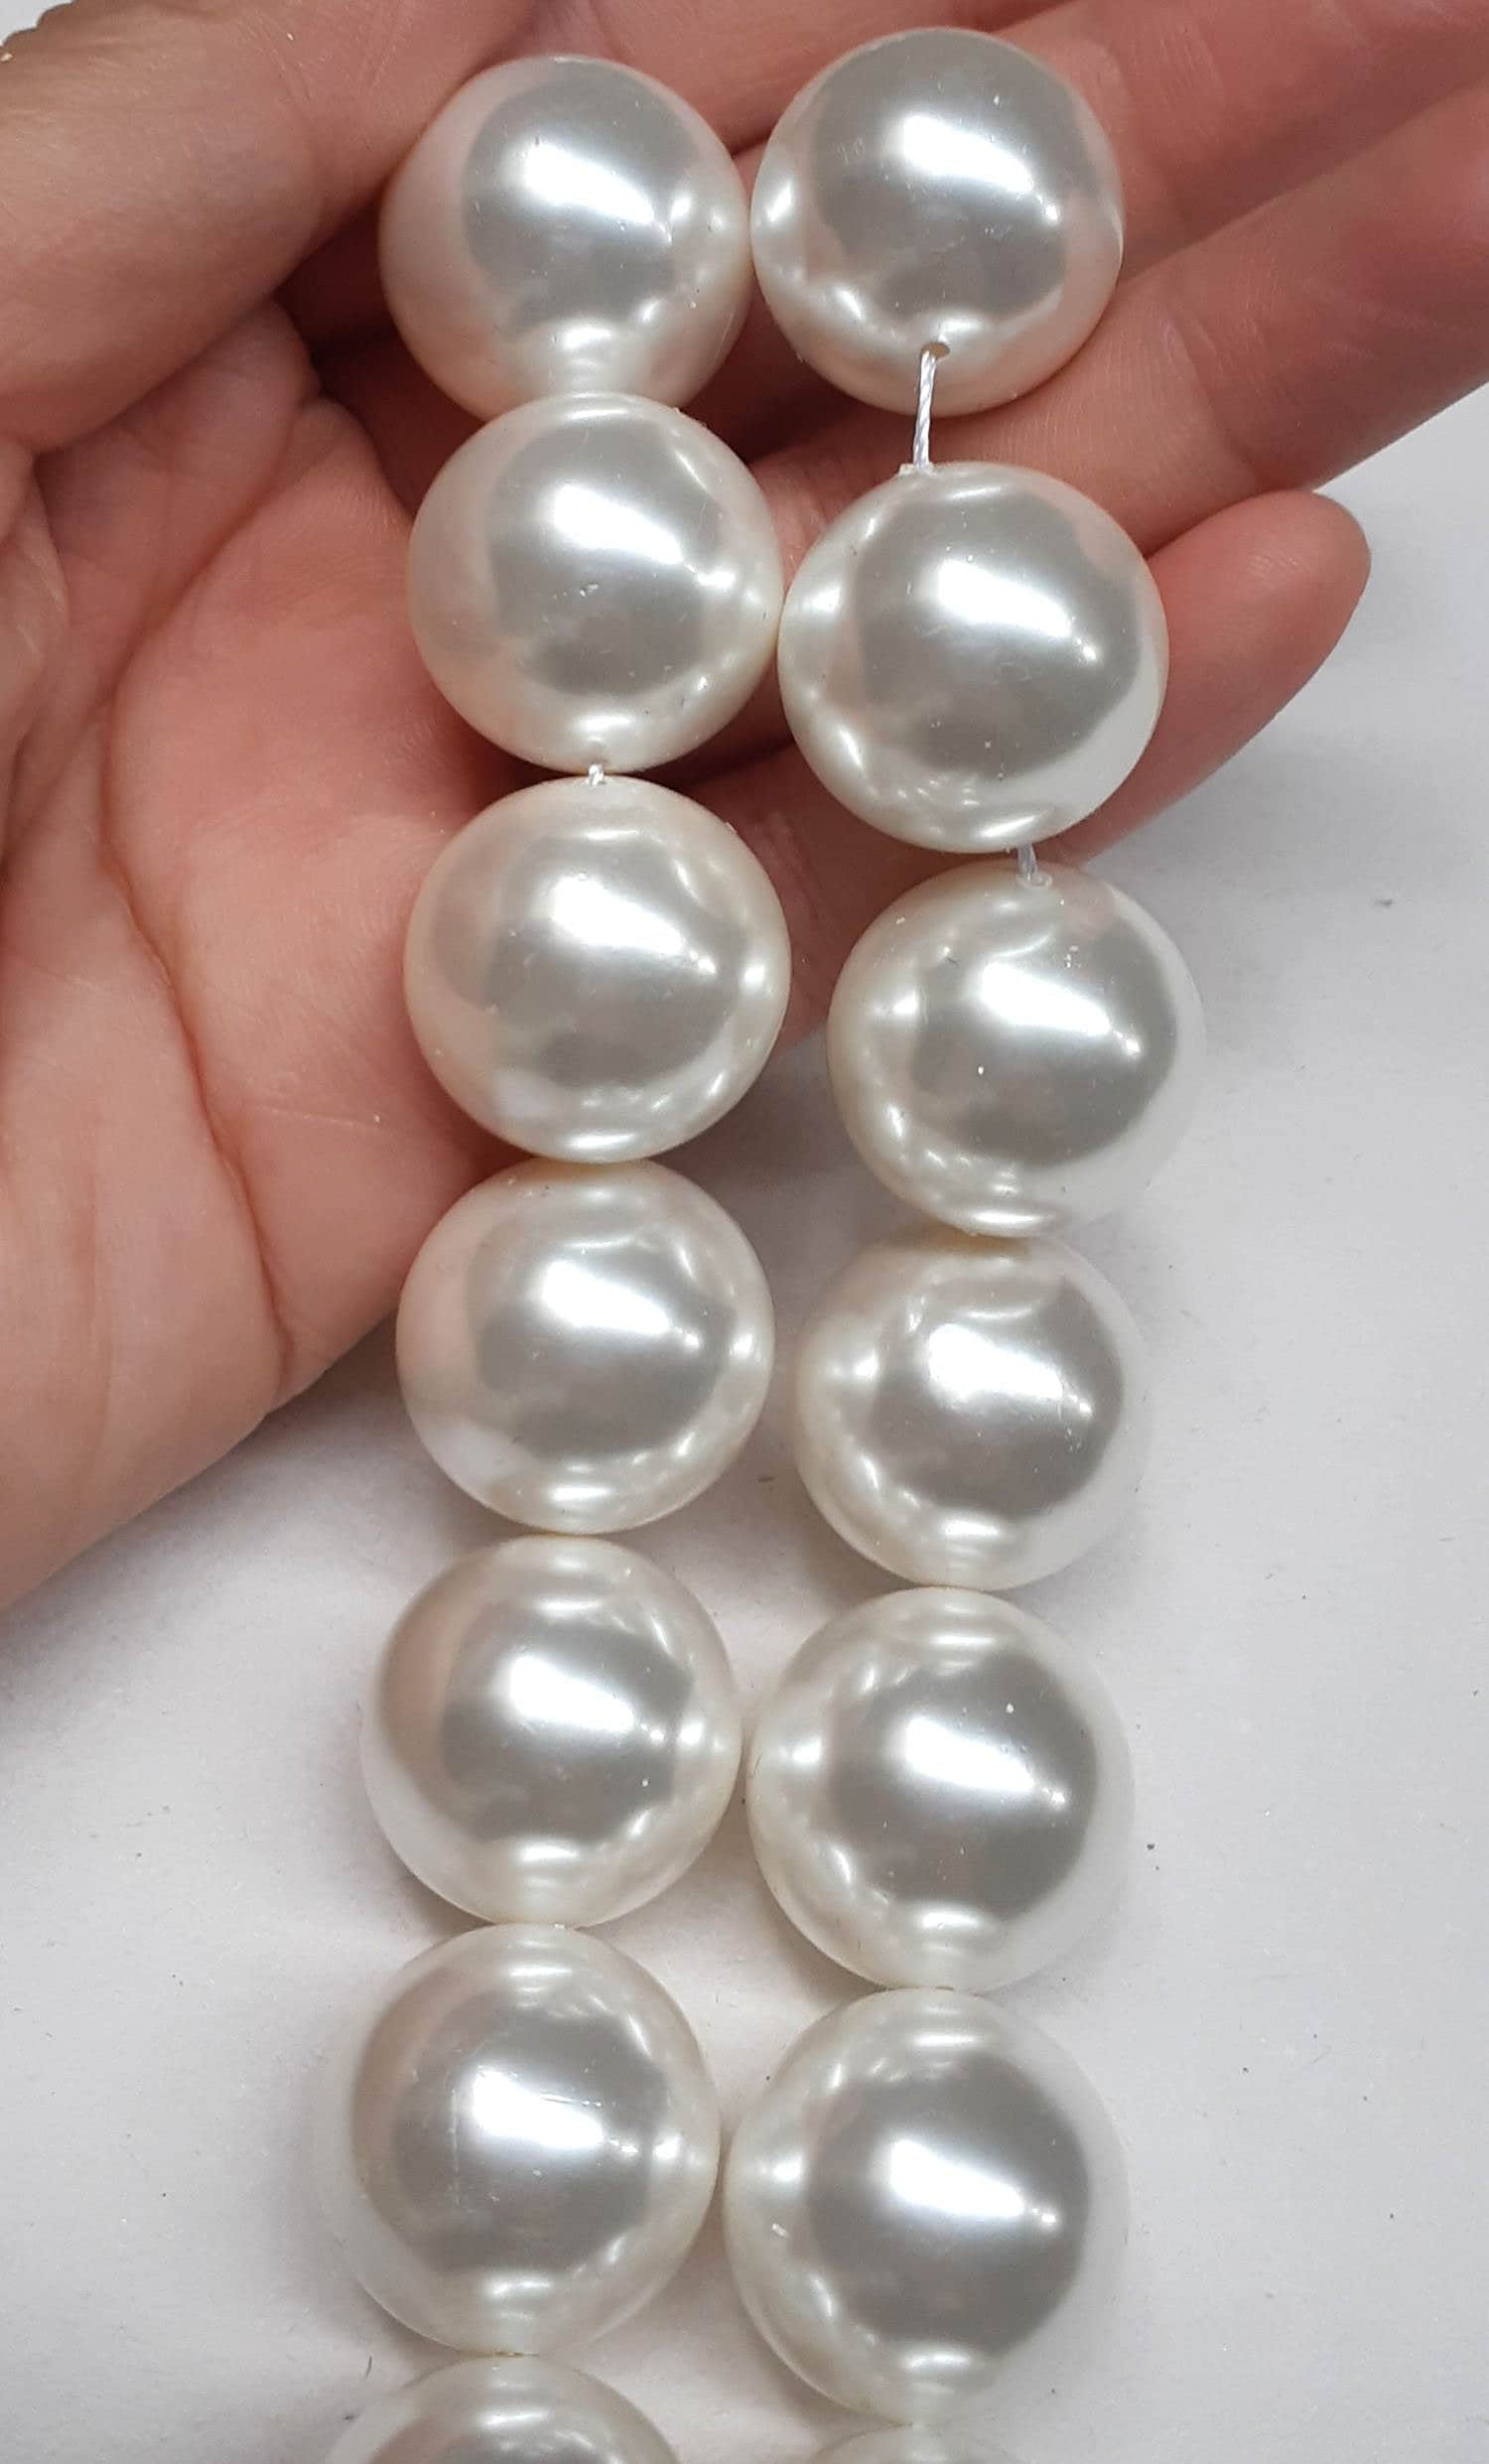 Anlan-angel 100pcs 20mm White Pearl Beads,Loose Pearl Spacer Beads with Hole Big Size Faux Pearls Round White Beads for DIY Craft Bracele